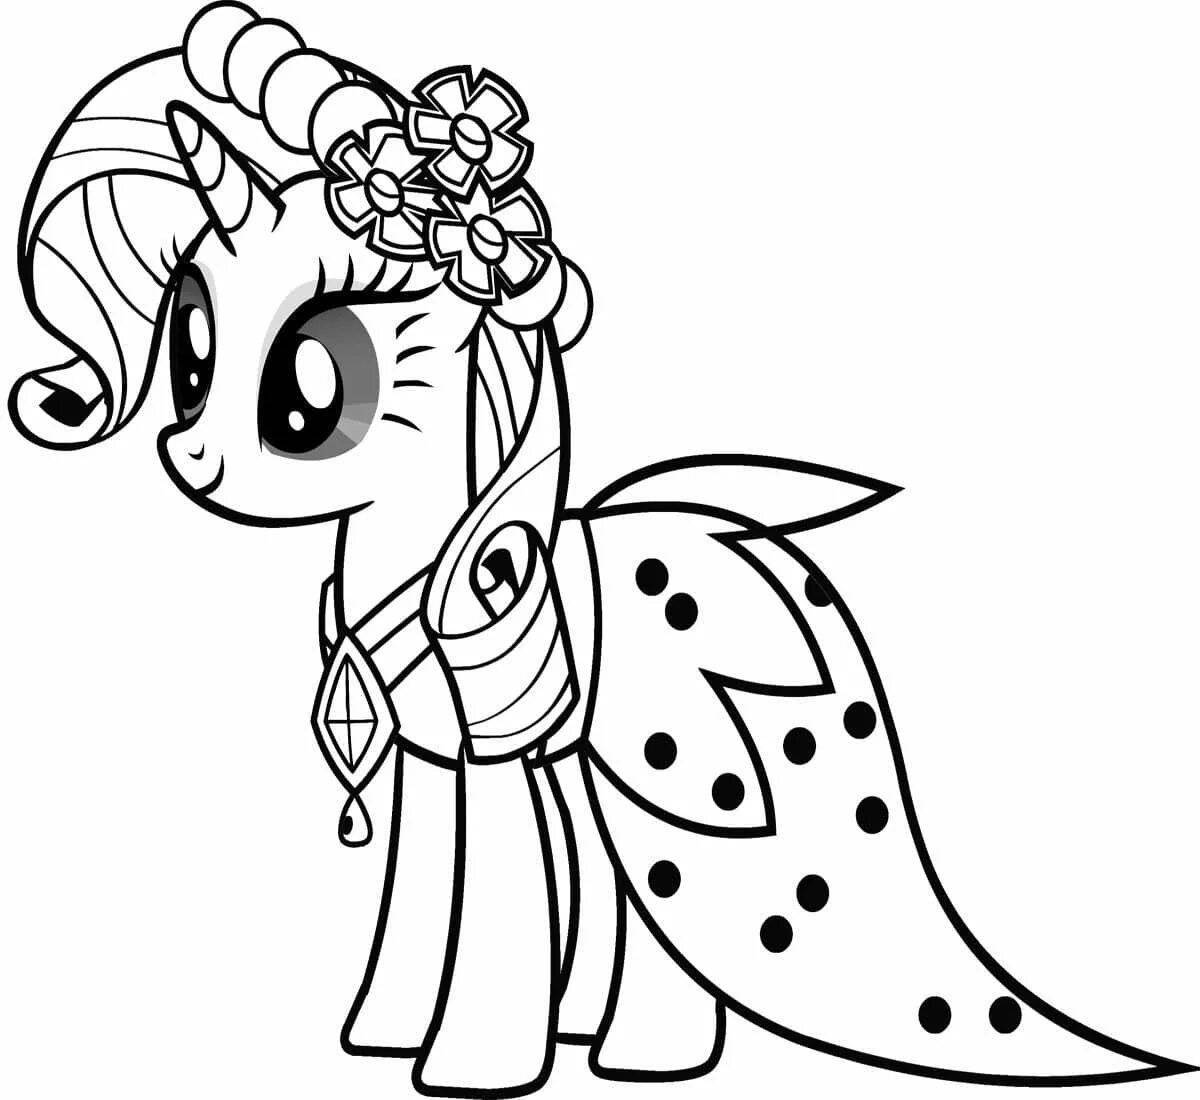 Fancy pony coloring